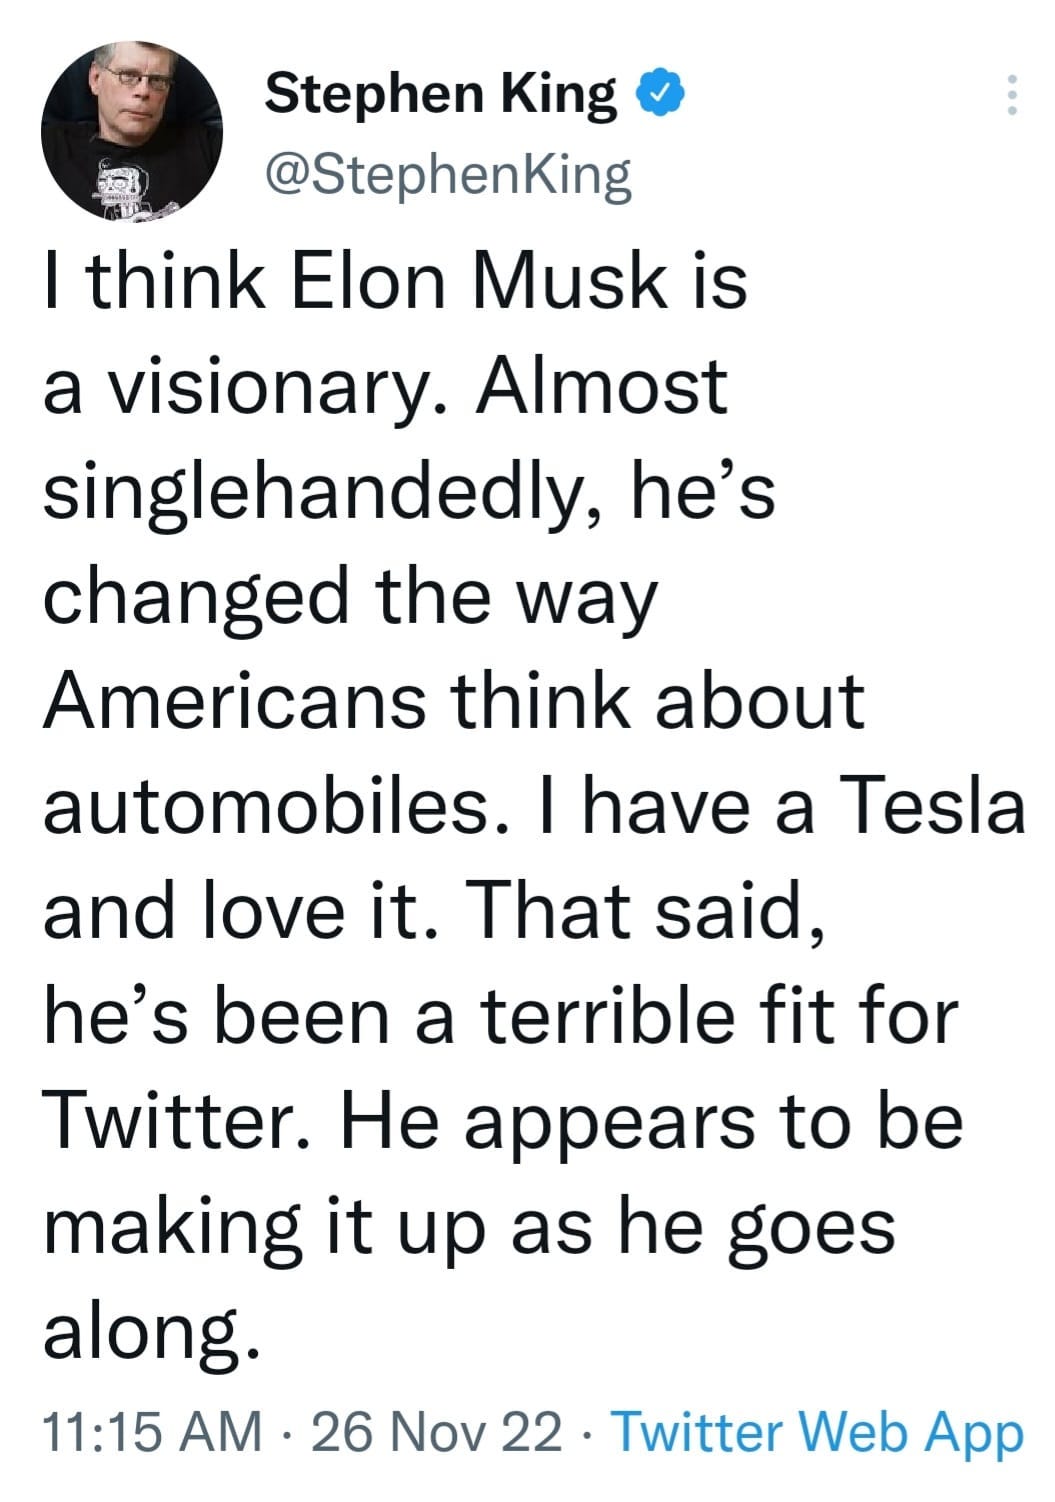 May be an image of 1 person and text that says 'Stephen King @StephenKing I think Elon Musk is a visionary. Almost singlehandedly, he's changed the way Americans think about automobiles. I have a Tesla and love it. That said, he's been a terrible fit for Twitter. He appears to be making it up as he goes along. 11:15 AM 26 Nov 22. Twitter Web App'